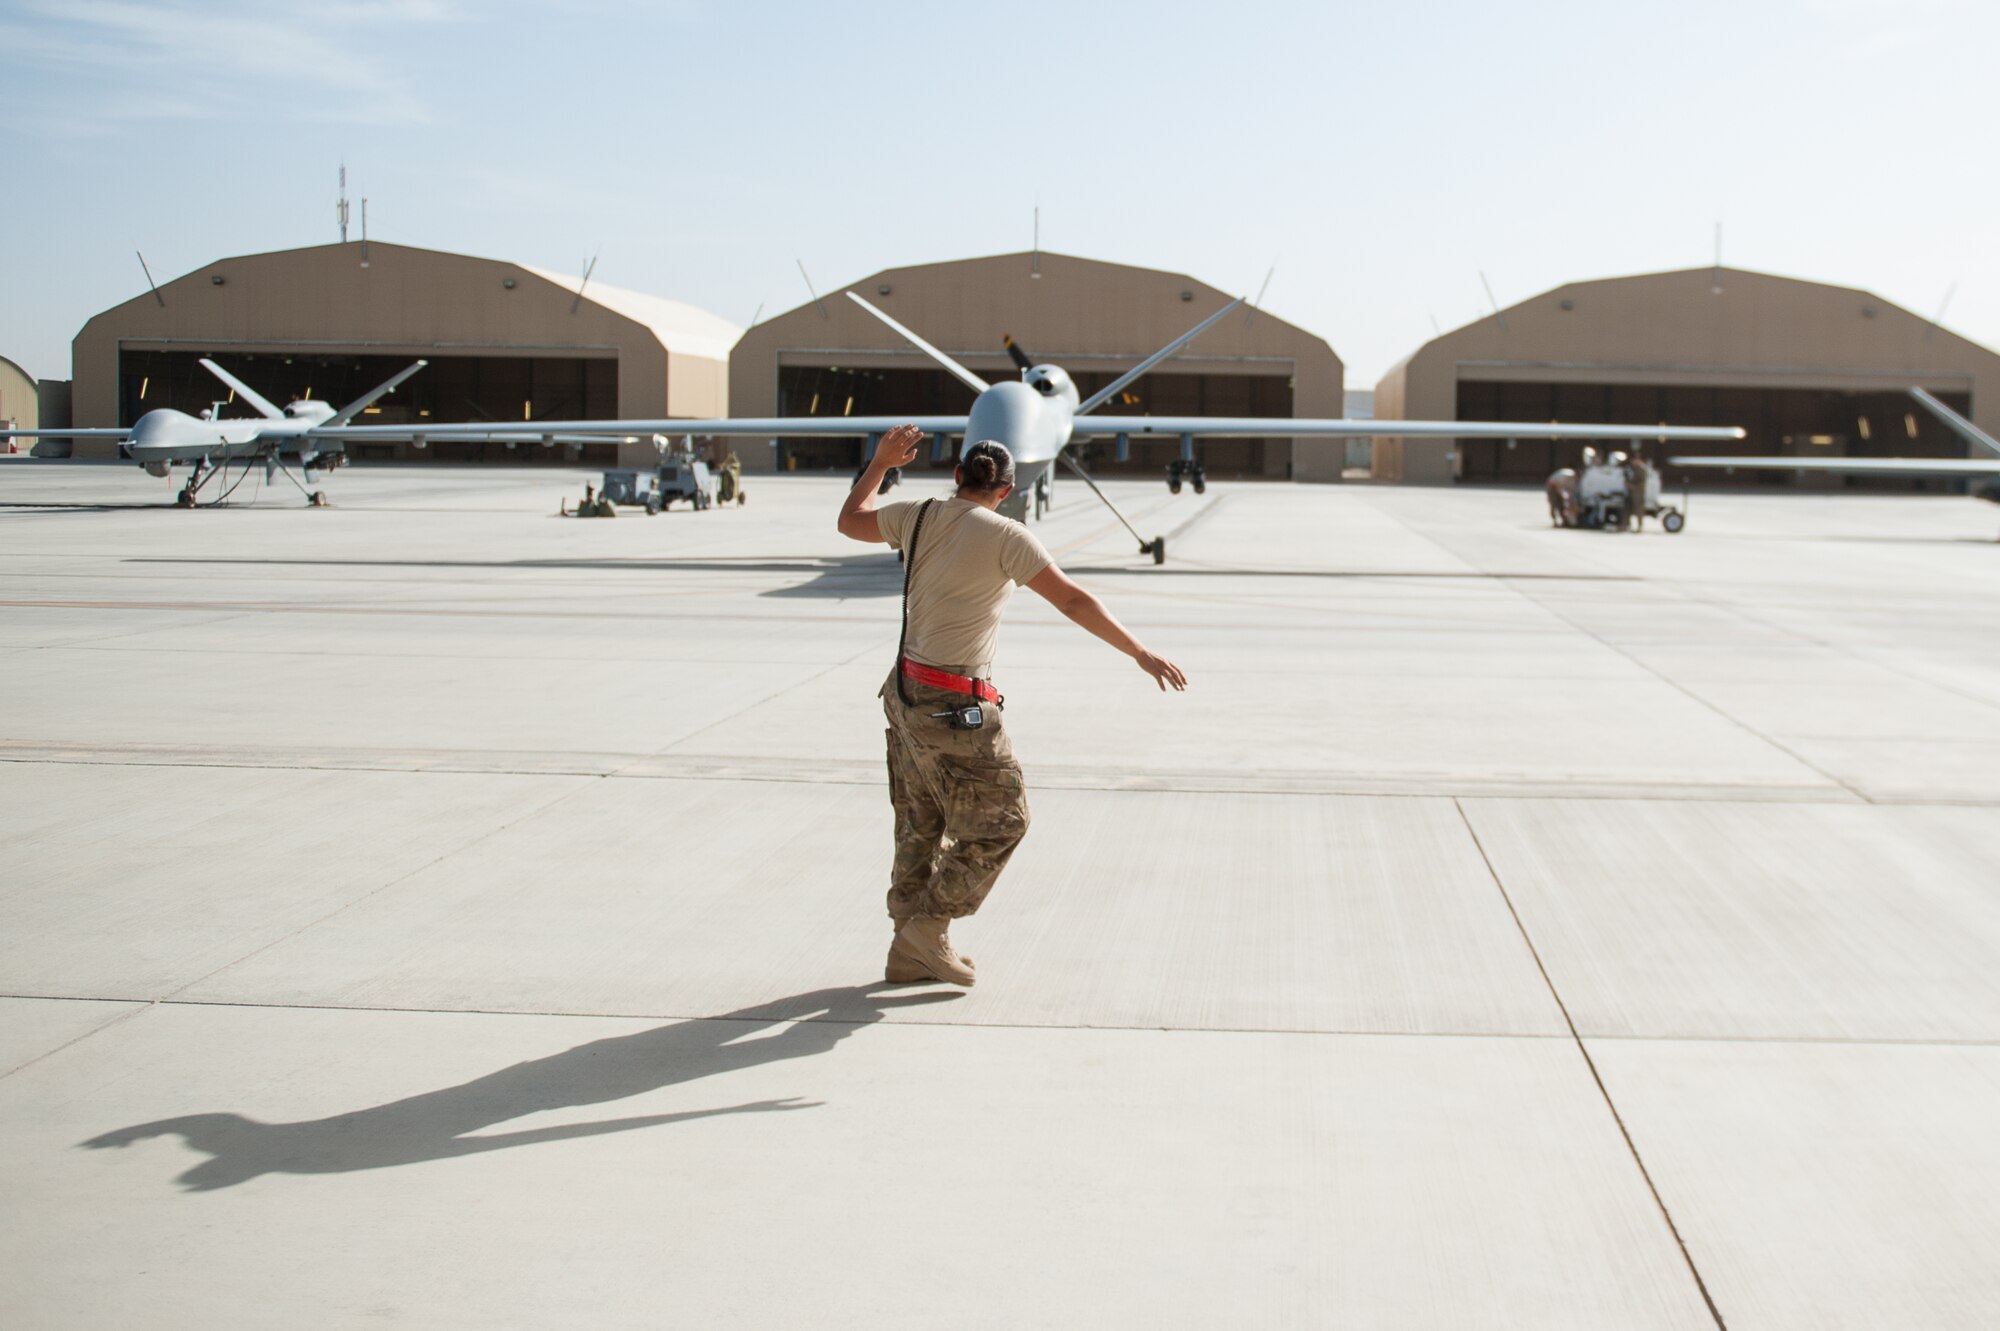 U.S. Air Force Senior Airman Sarah Morales, 62nd Expeditionary Reconnaissance Squadron MQ-9 Reaper aircraft technician, launches a Reaper at Kandahar Airfield, Aug. 14, 2015. Morales keeps the Reapers at KAF in the air by performing routine maintenance on the aircraft as well as launching and recovering them to keep the missions and sorties going. (U.S. Air Force photo by Tech. Sgt. Joseph Swafford/Released)